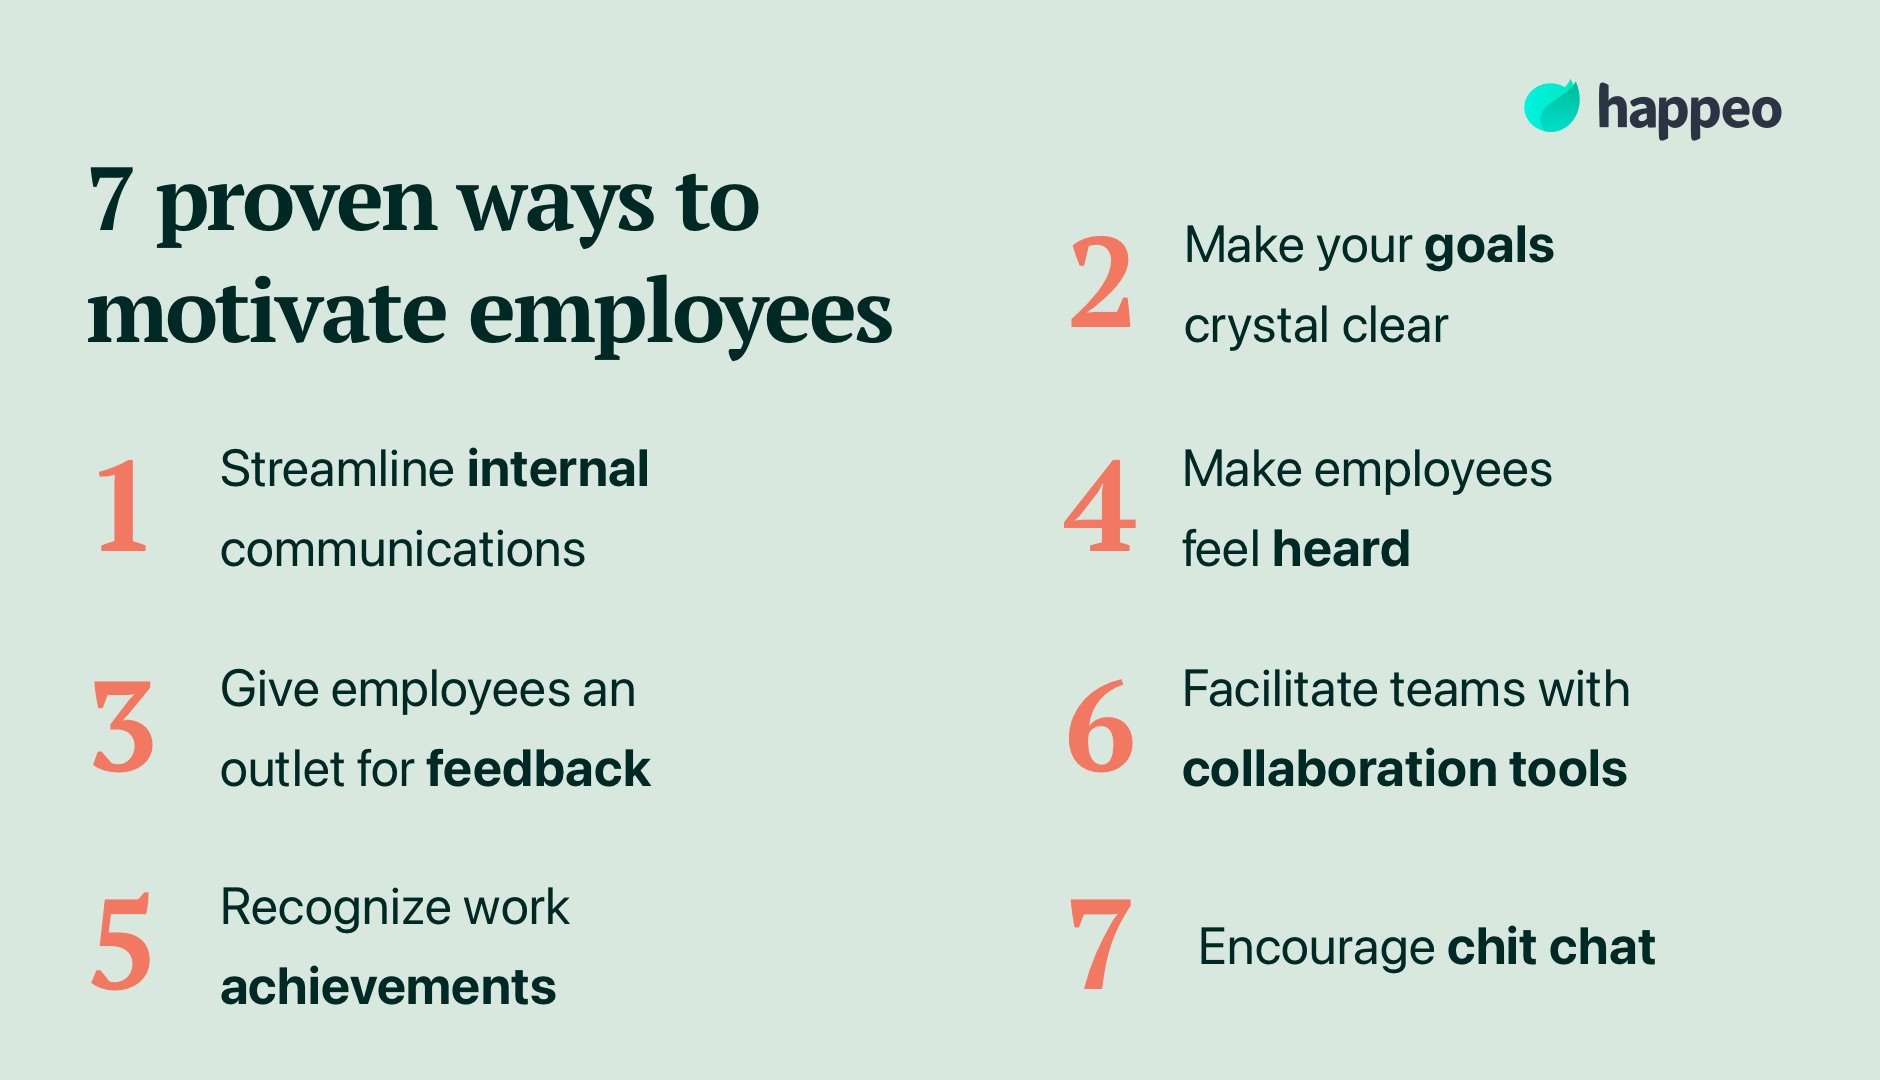 How Can a Business Motivate Employees?